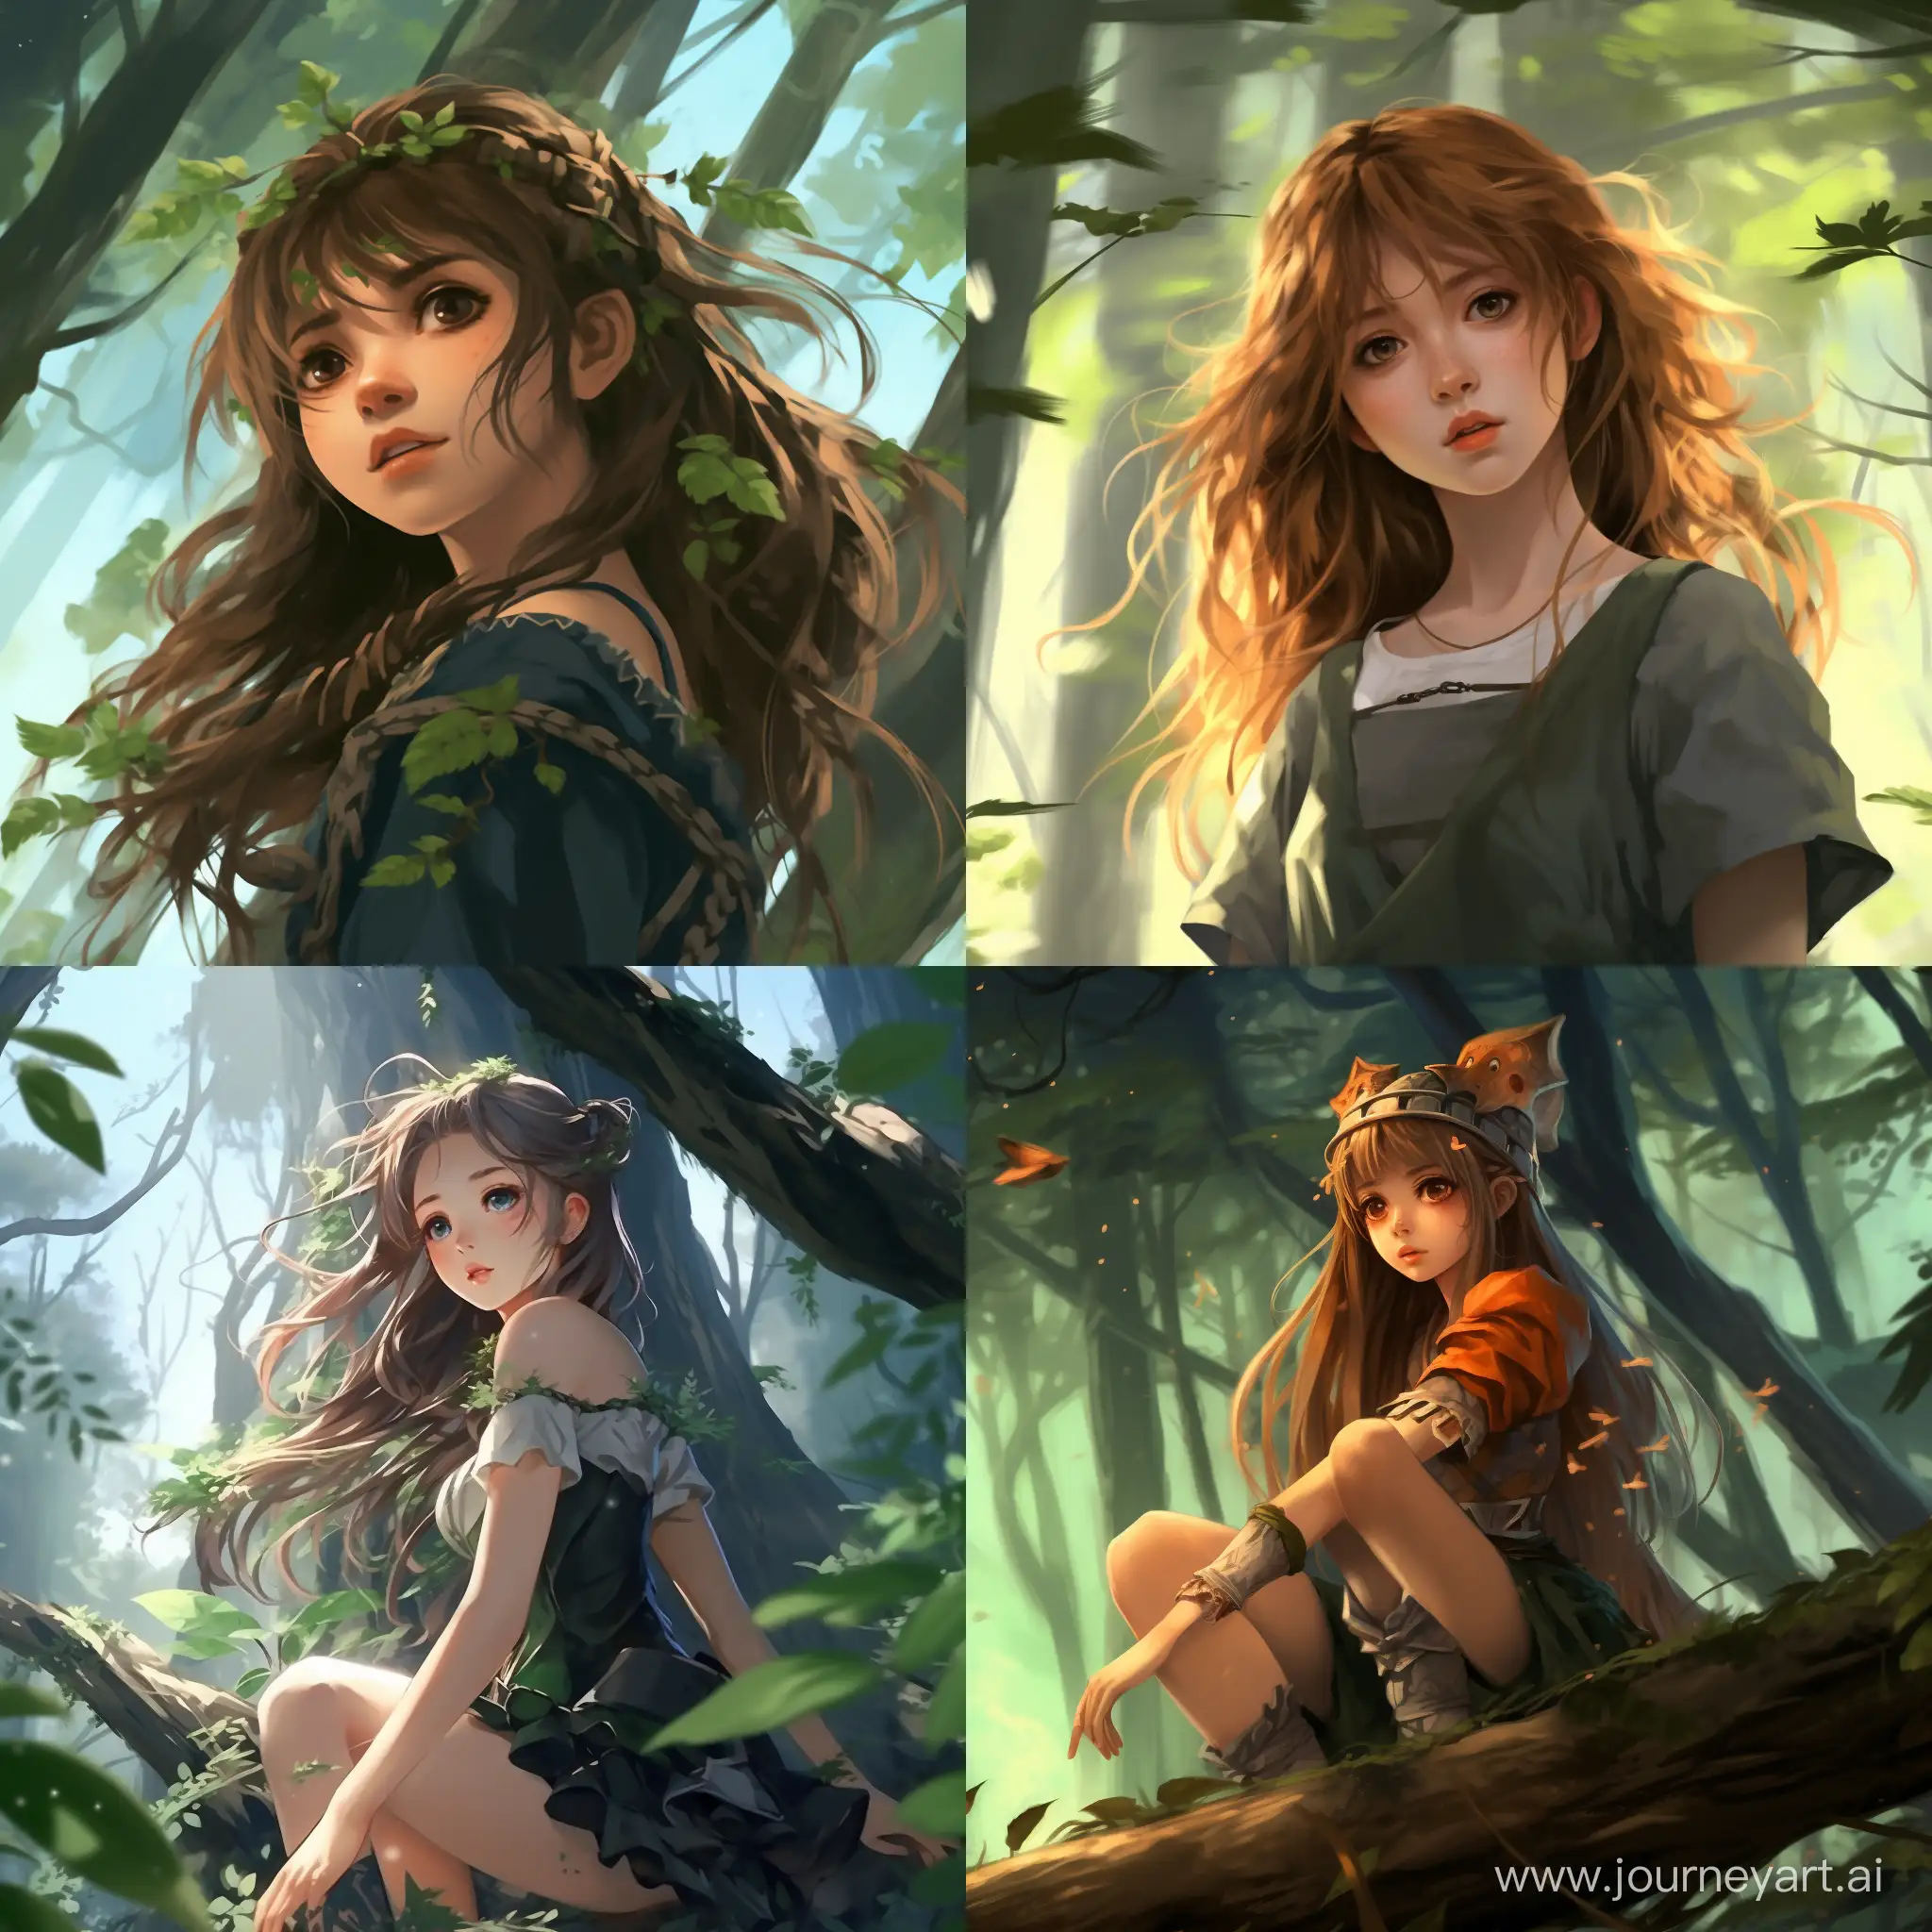 Enchanting-Anime-Girl-in-a-Mystical-Forest